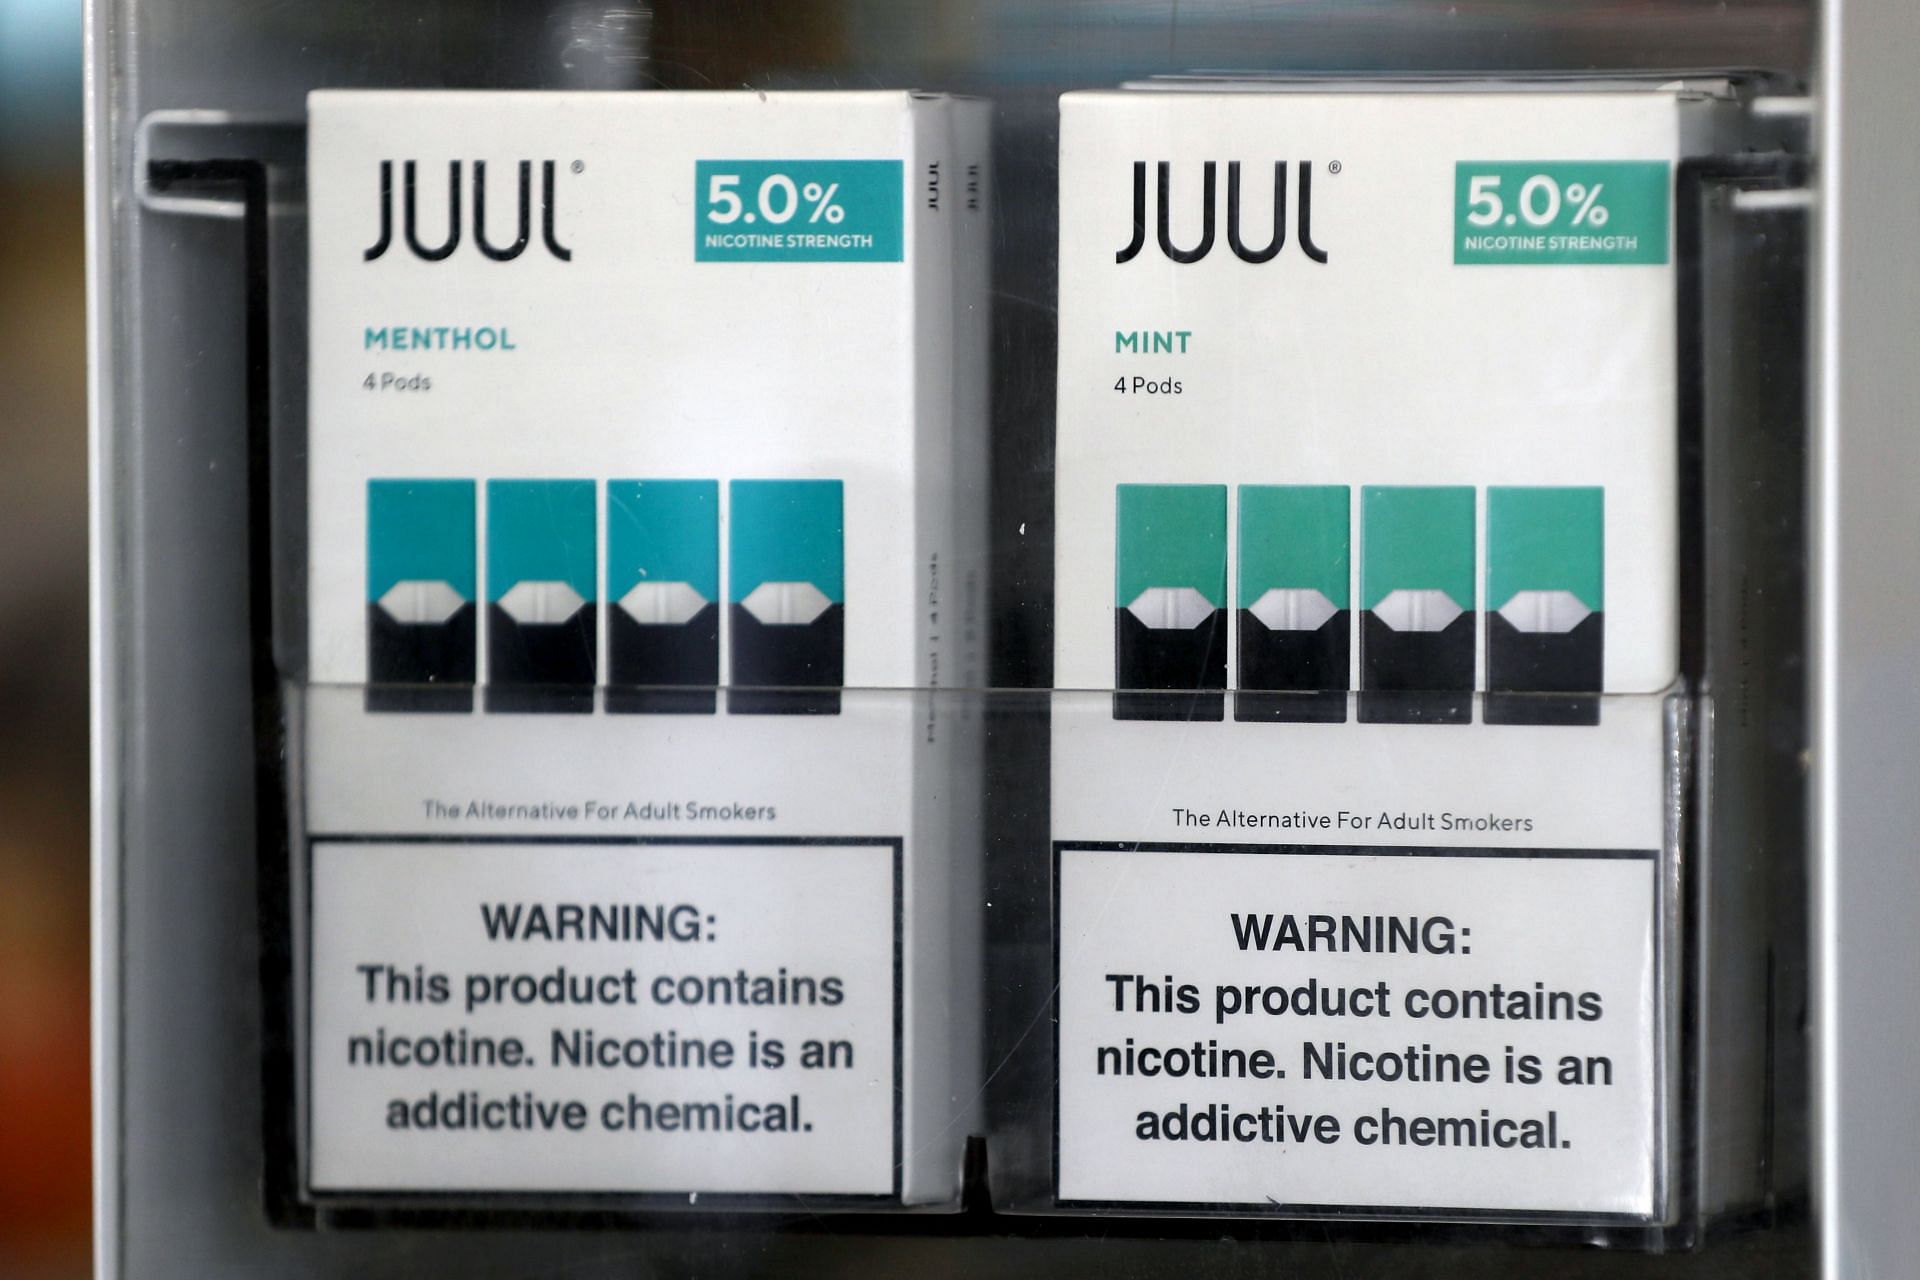 Flavored product of the controversial company Juul on shelves (Image via Justin Sullivan/Getty Images)